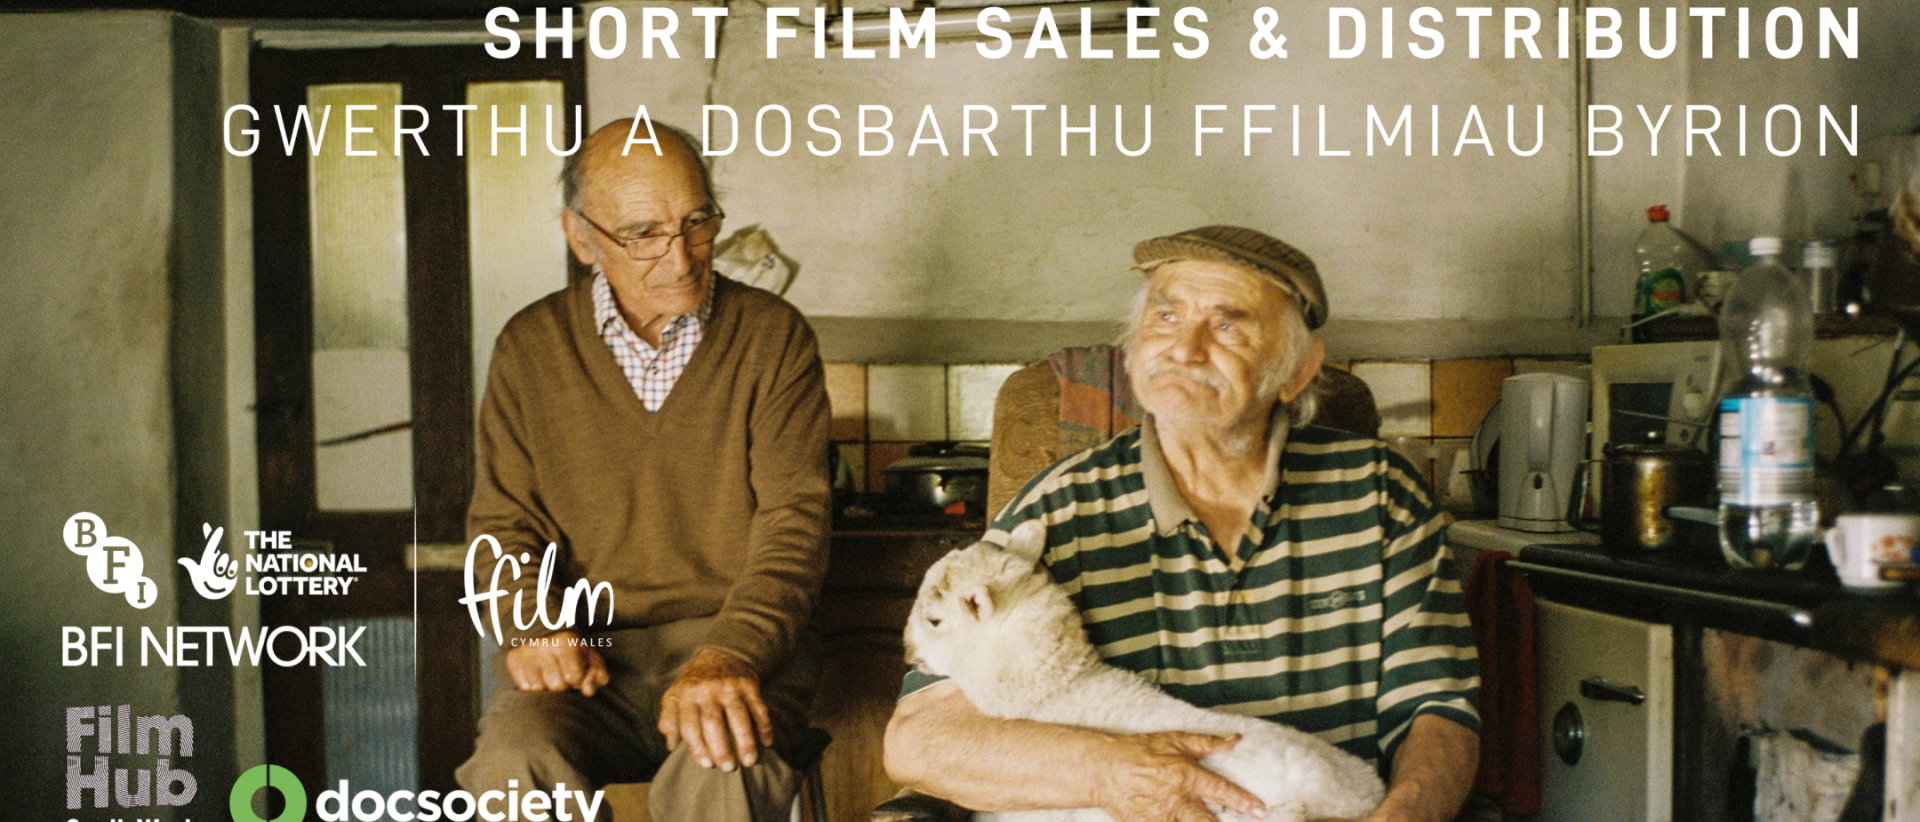 short film sales and distribution